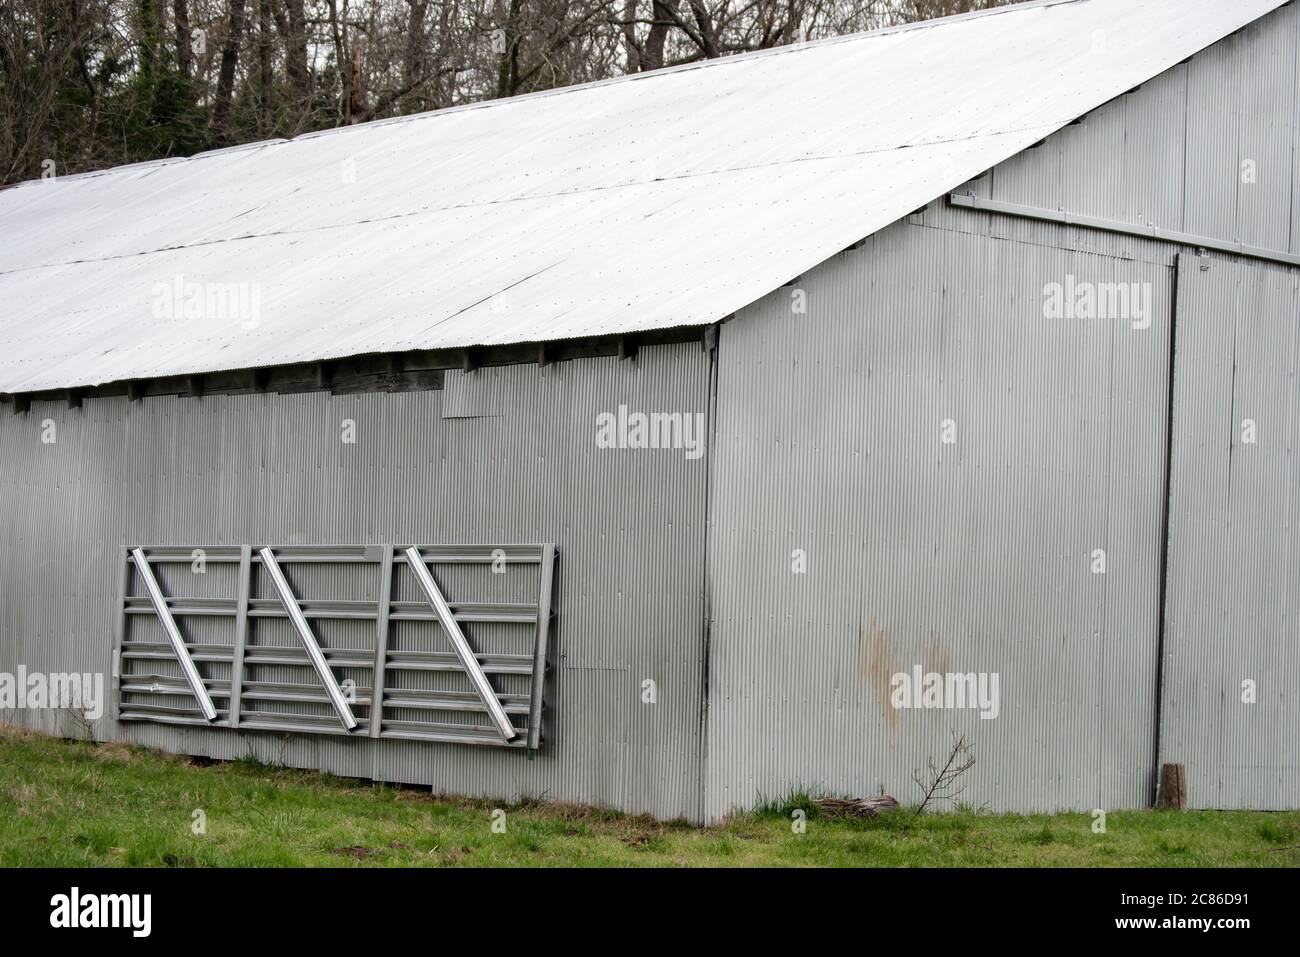 A tin barn shines brightly in the sunlight on a farm in Missouri. A portable metal gate hangs on the side of the barn ready for use when needed. Stock Photo